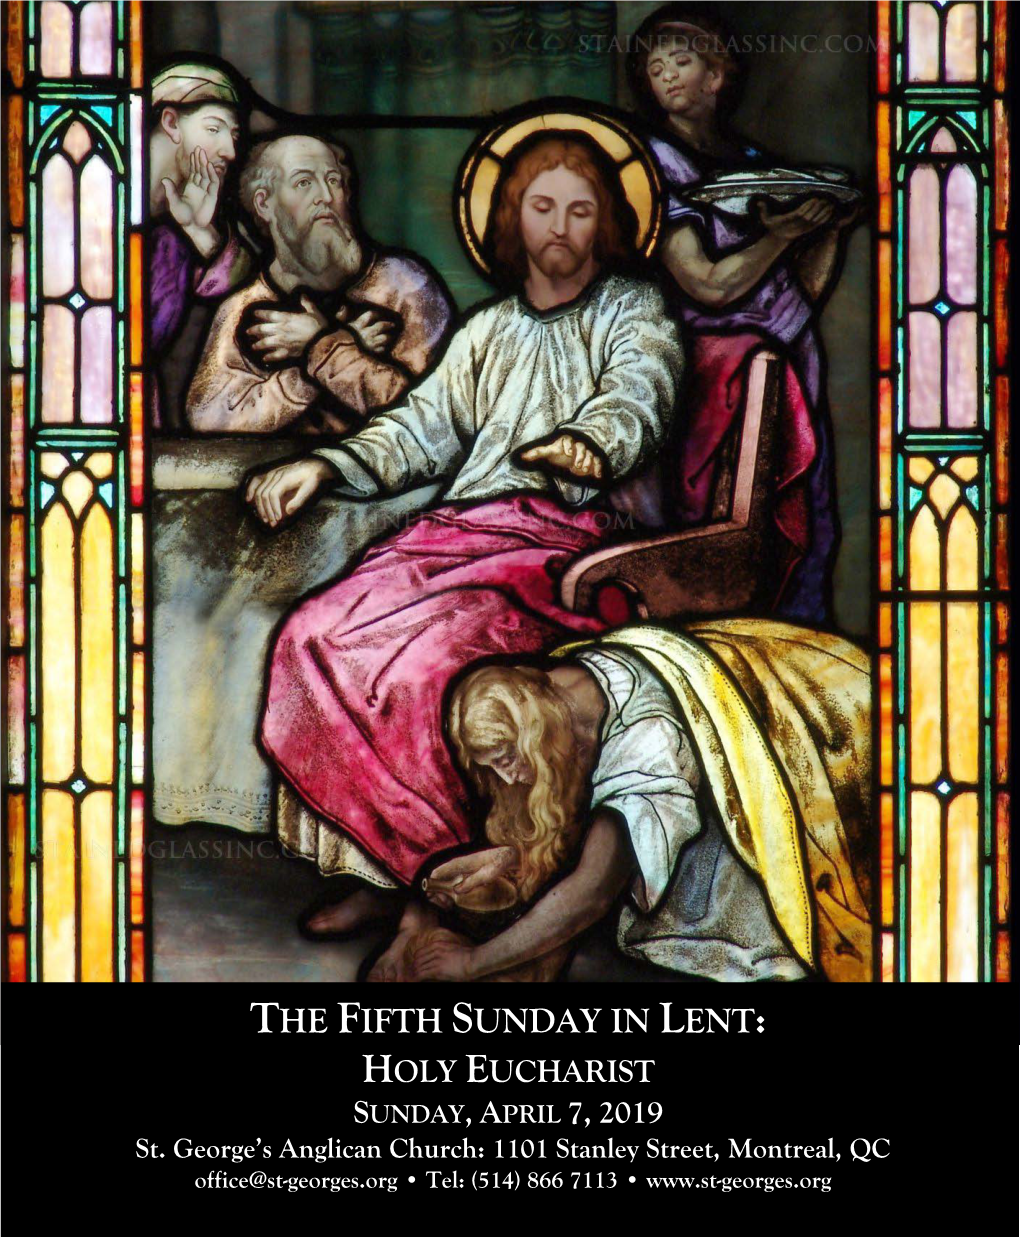 The Fifth Sunday in Lent: Holy Eucharist